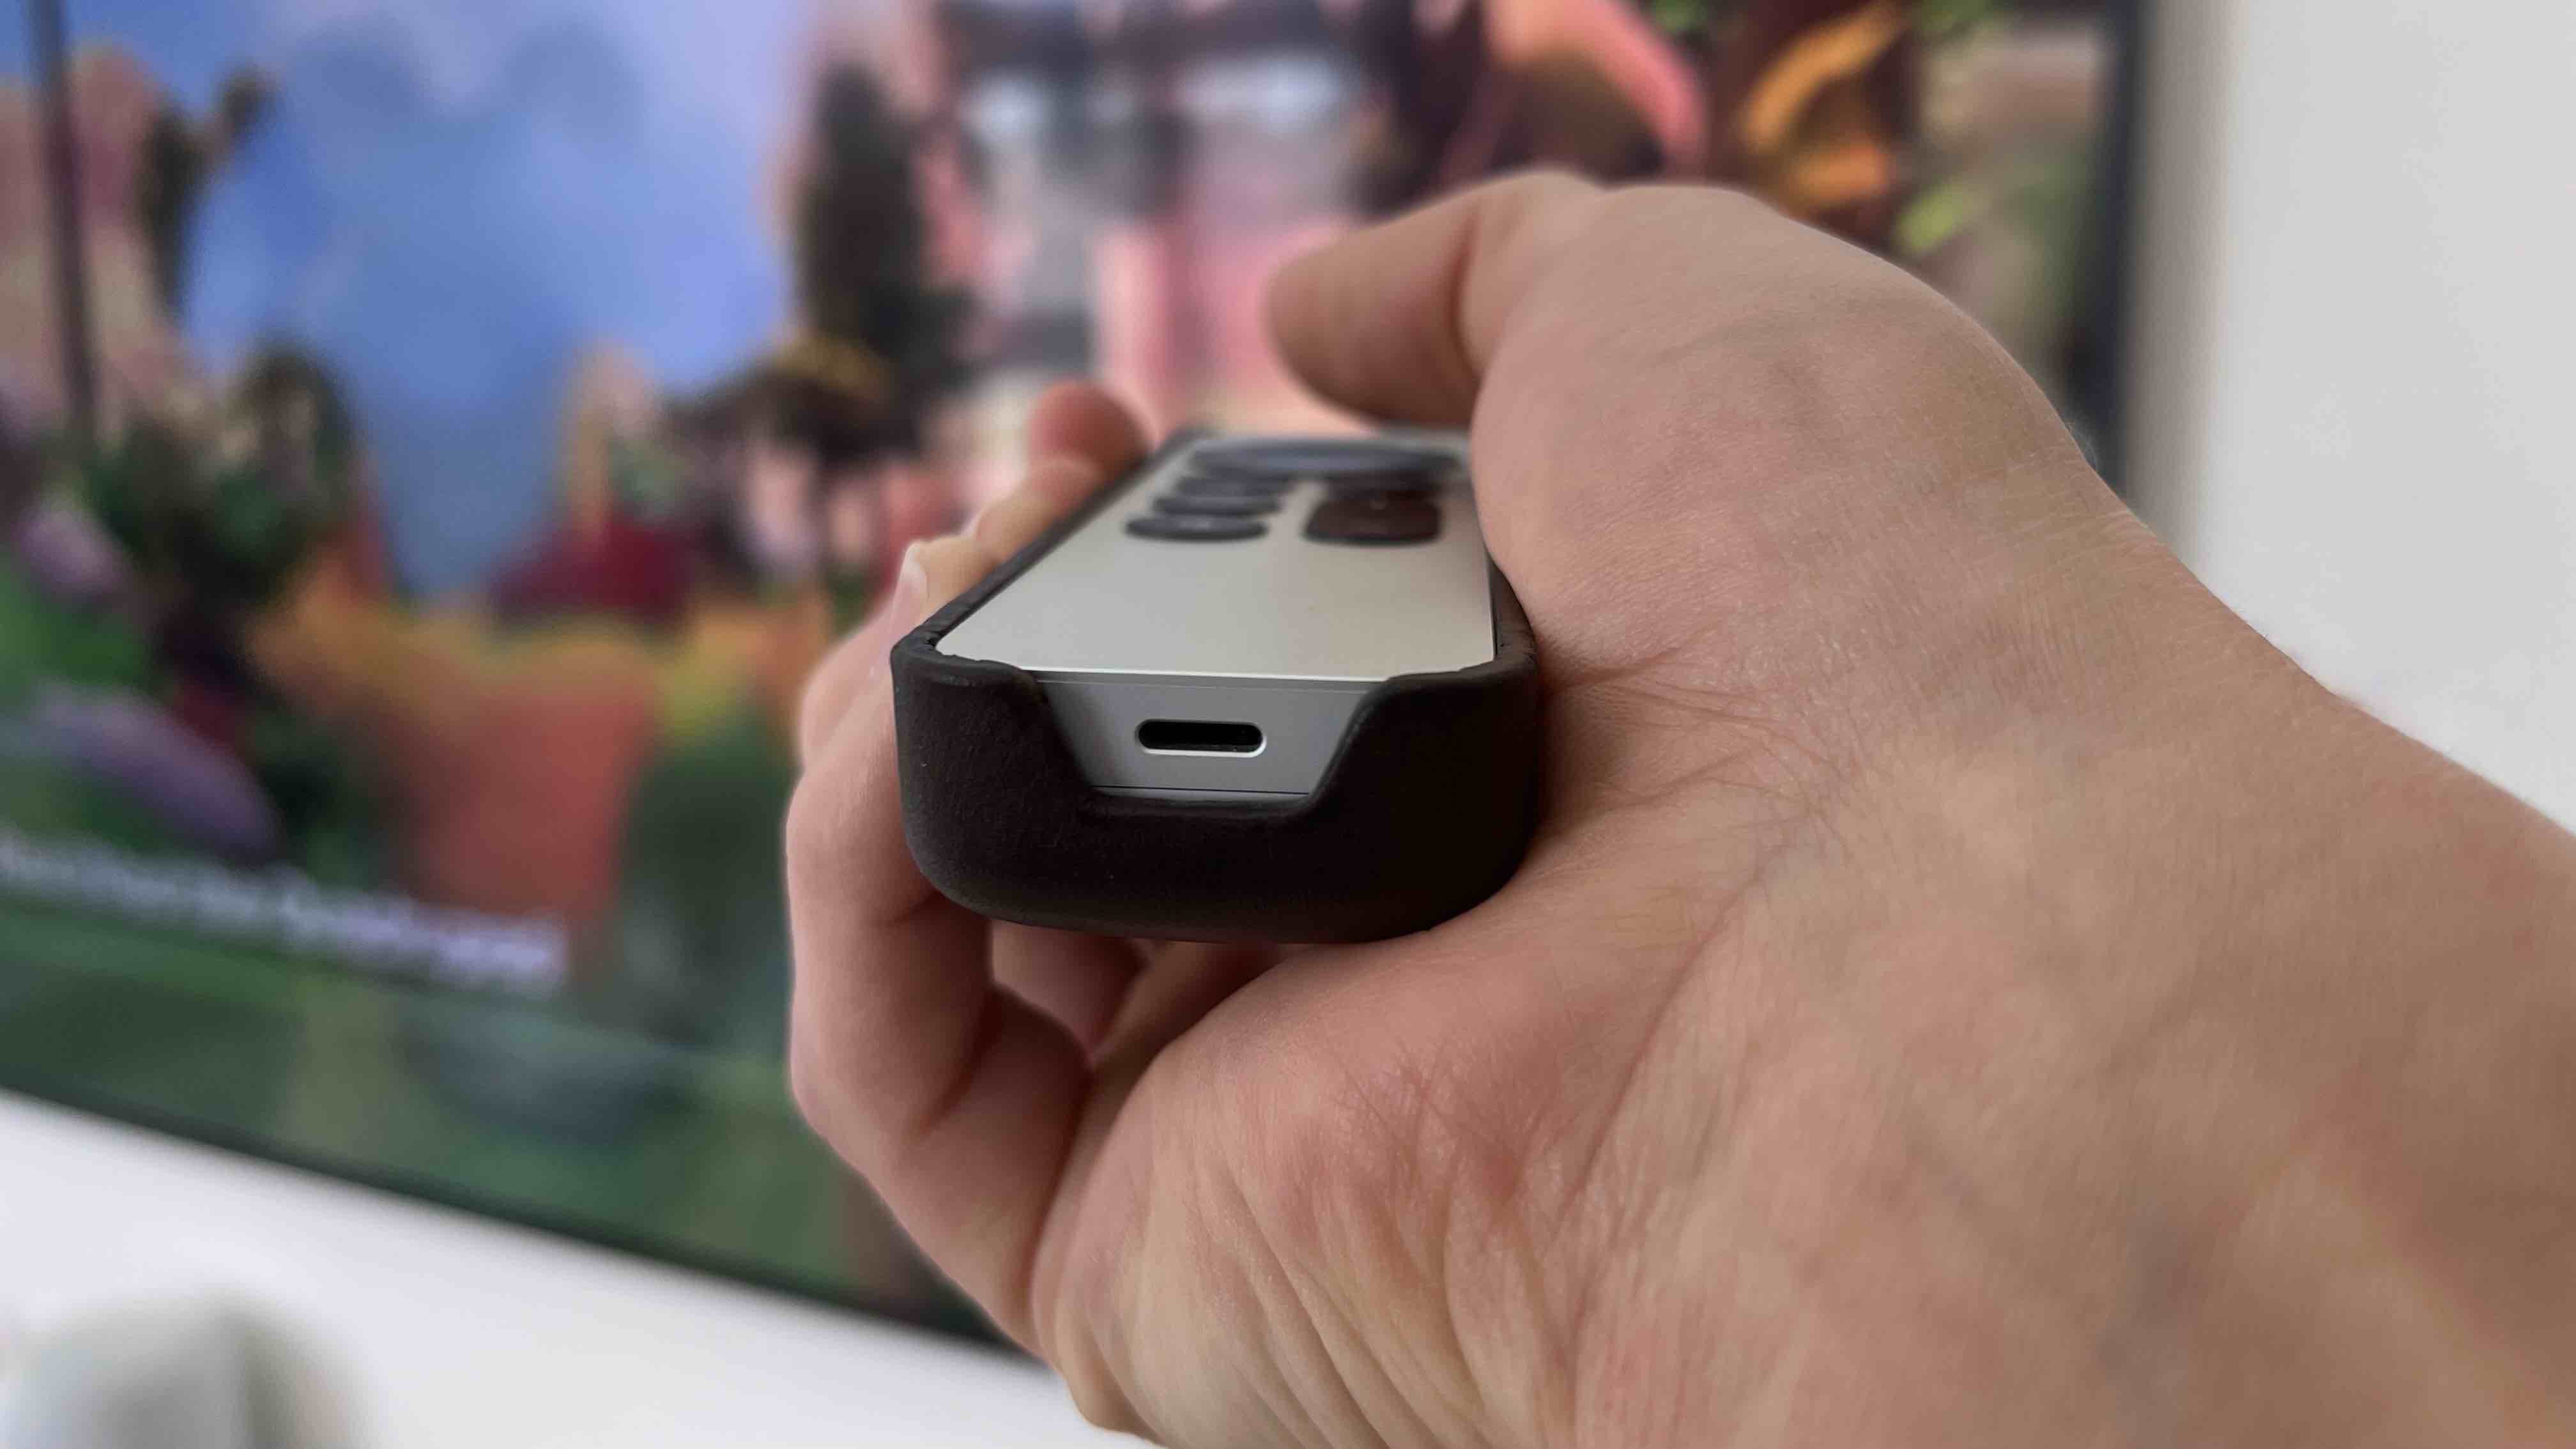 Leather Cover for Apple TV Remote in-hand